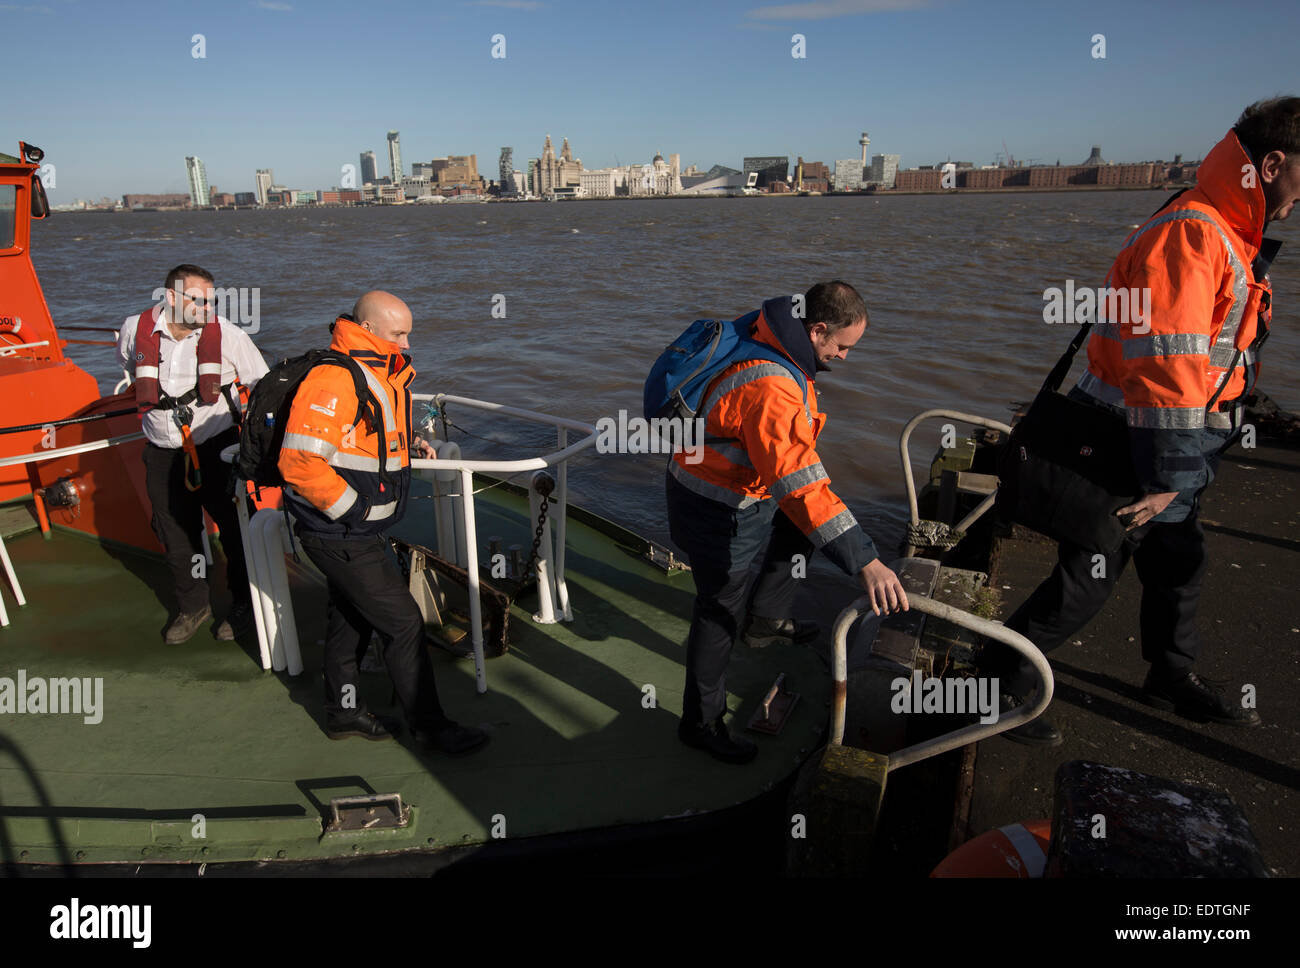 A team of Liverpool pilots employed by Liverpool Pilot Services Ltd on the river Mersey, England, disembark from a pilot launch. Stock Photo